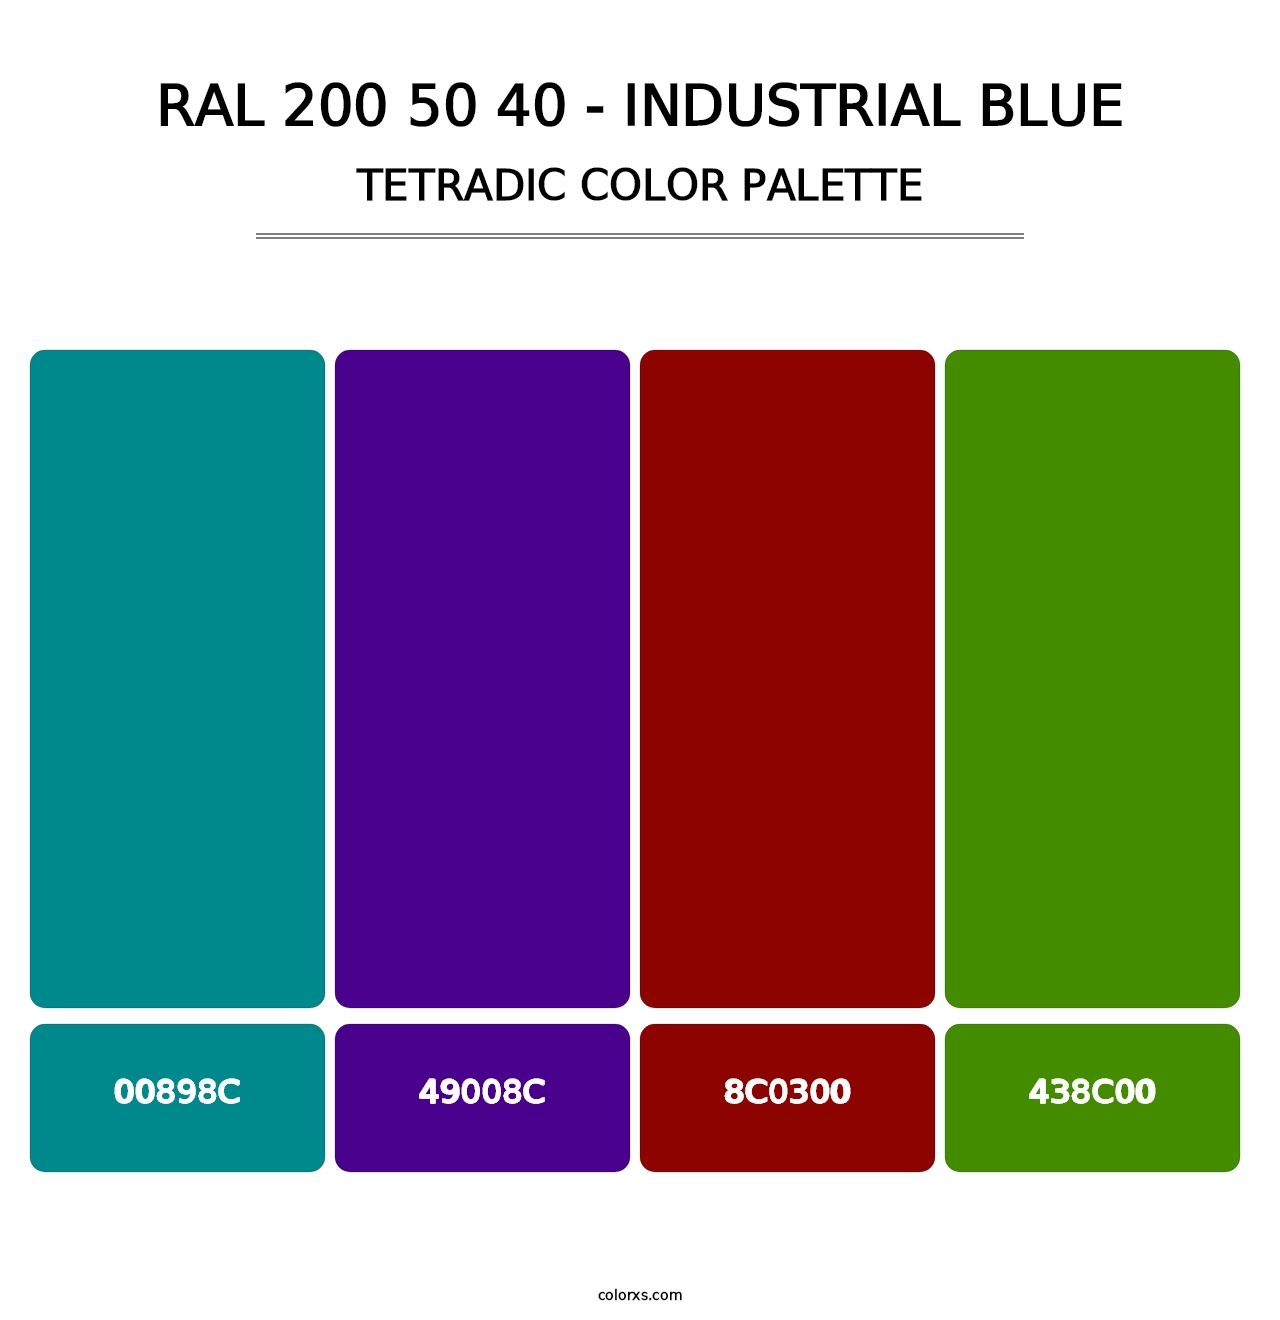 RAL 200 50 40 - Industrial Blue - Tetradic Color Palette